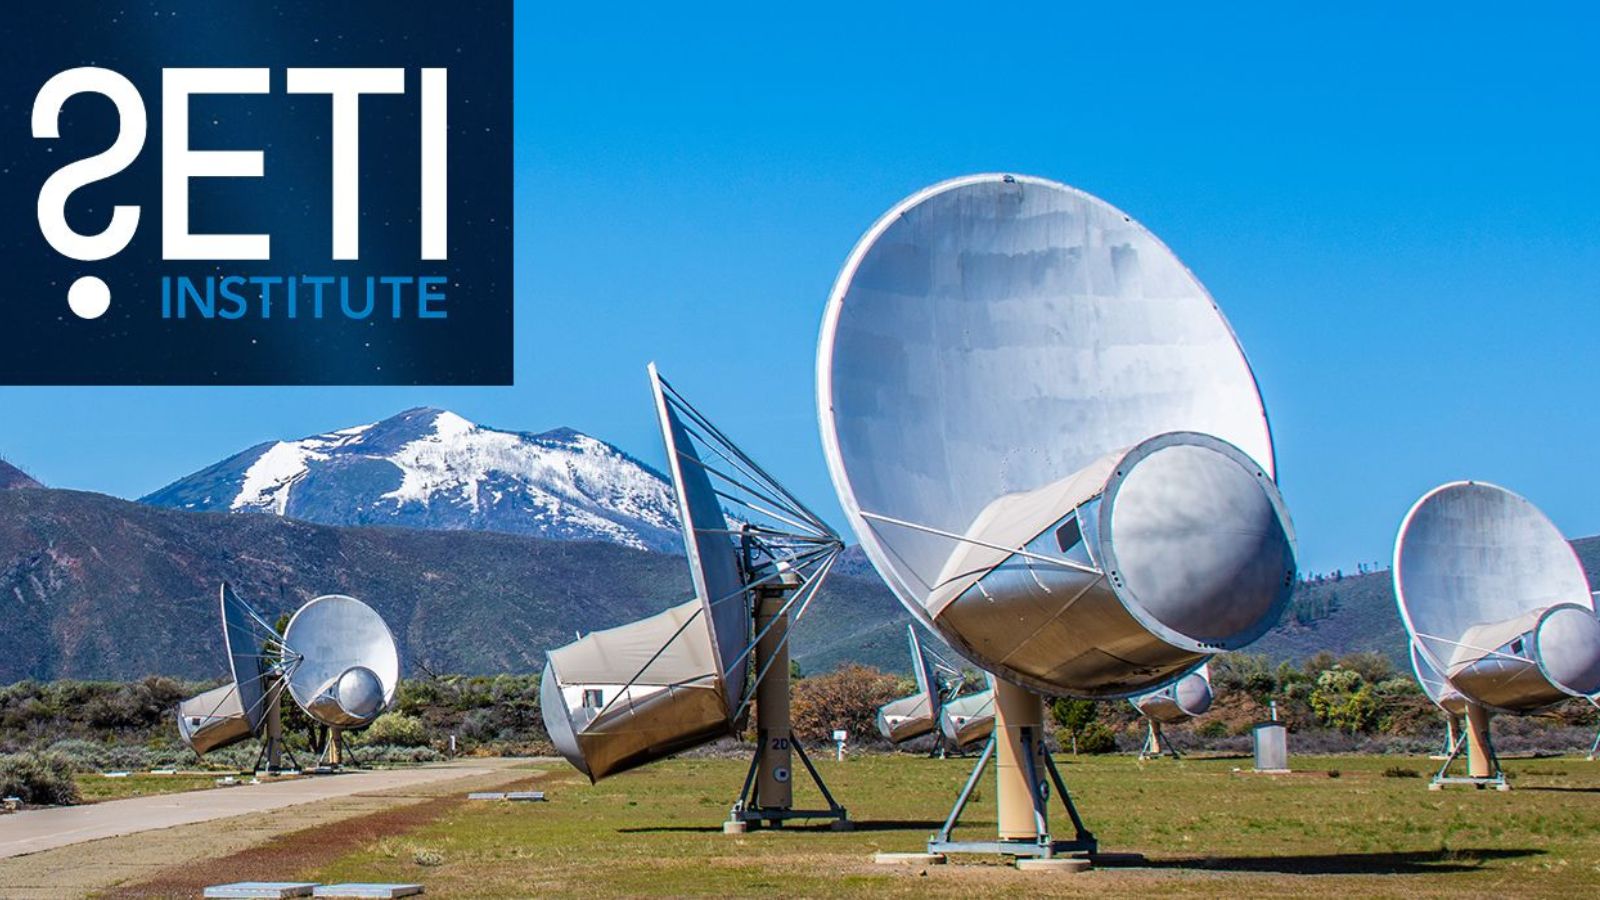 seti-institute-gets-usd200-million-from-qualcomm-co-founder-to-search-for-alien-life